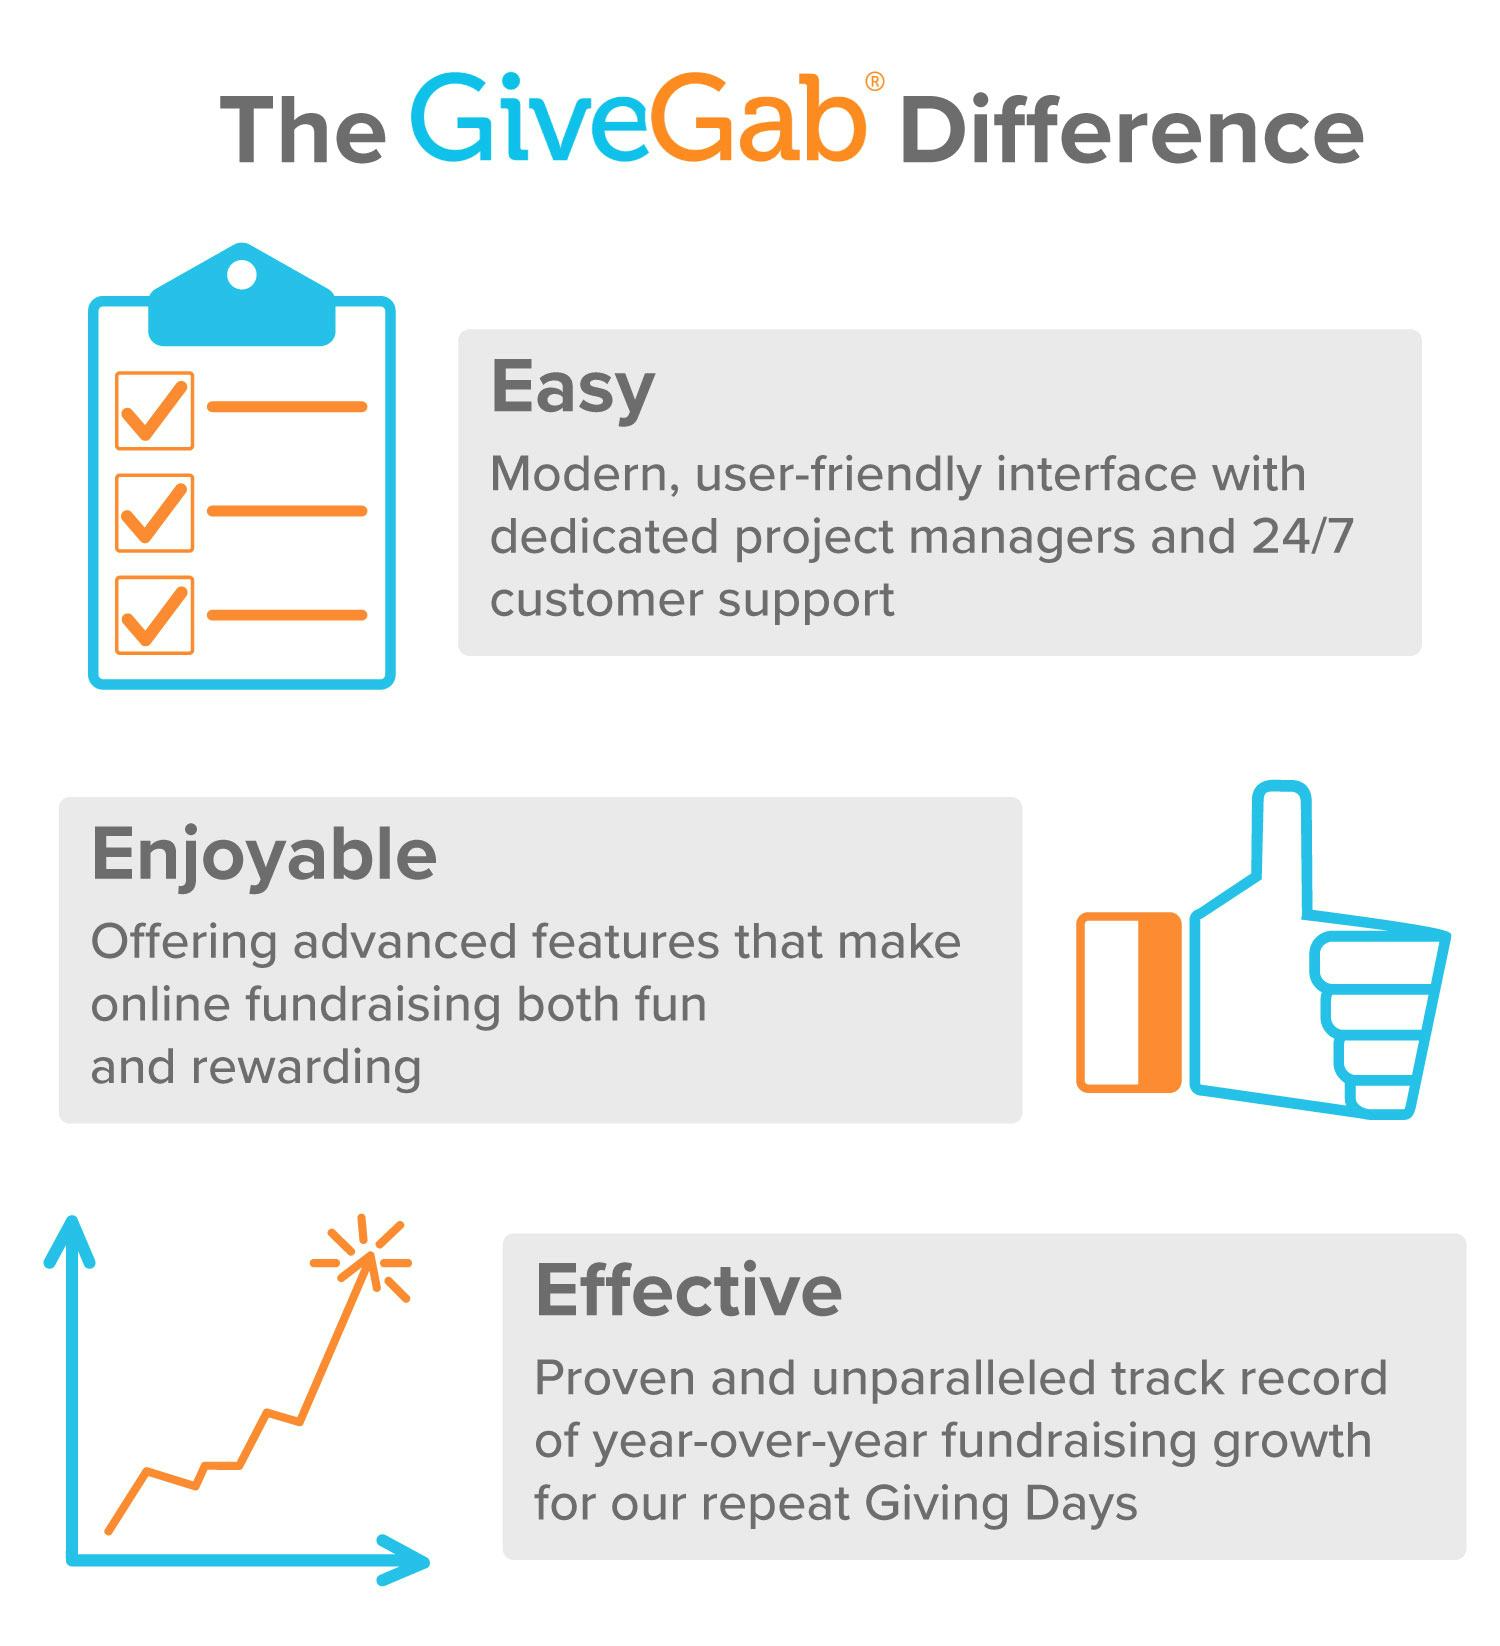 GiveGab Software - Our mission is to make it incredibly easy for you to be great at your job! We do this by giving you an easy, enjoyable, and effective digital fundraising experience you won't find anywhere else.